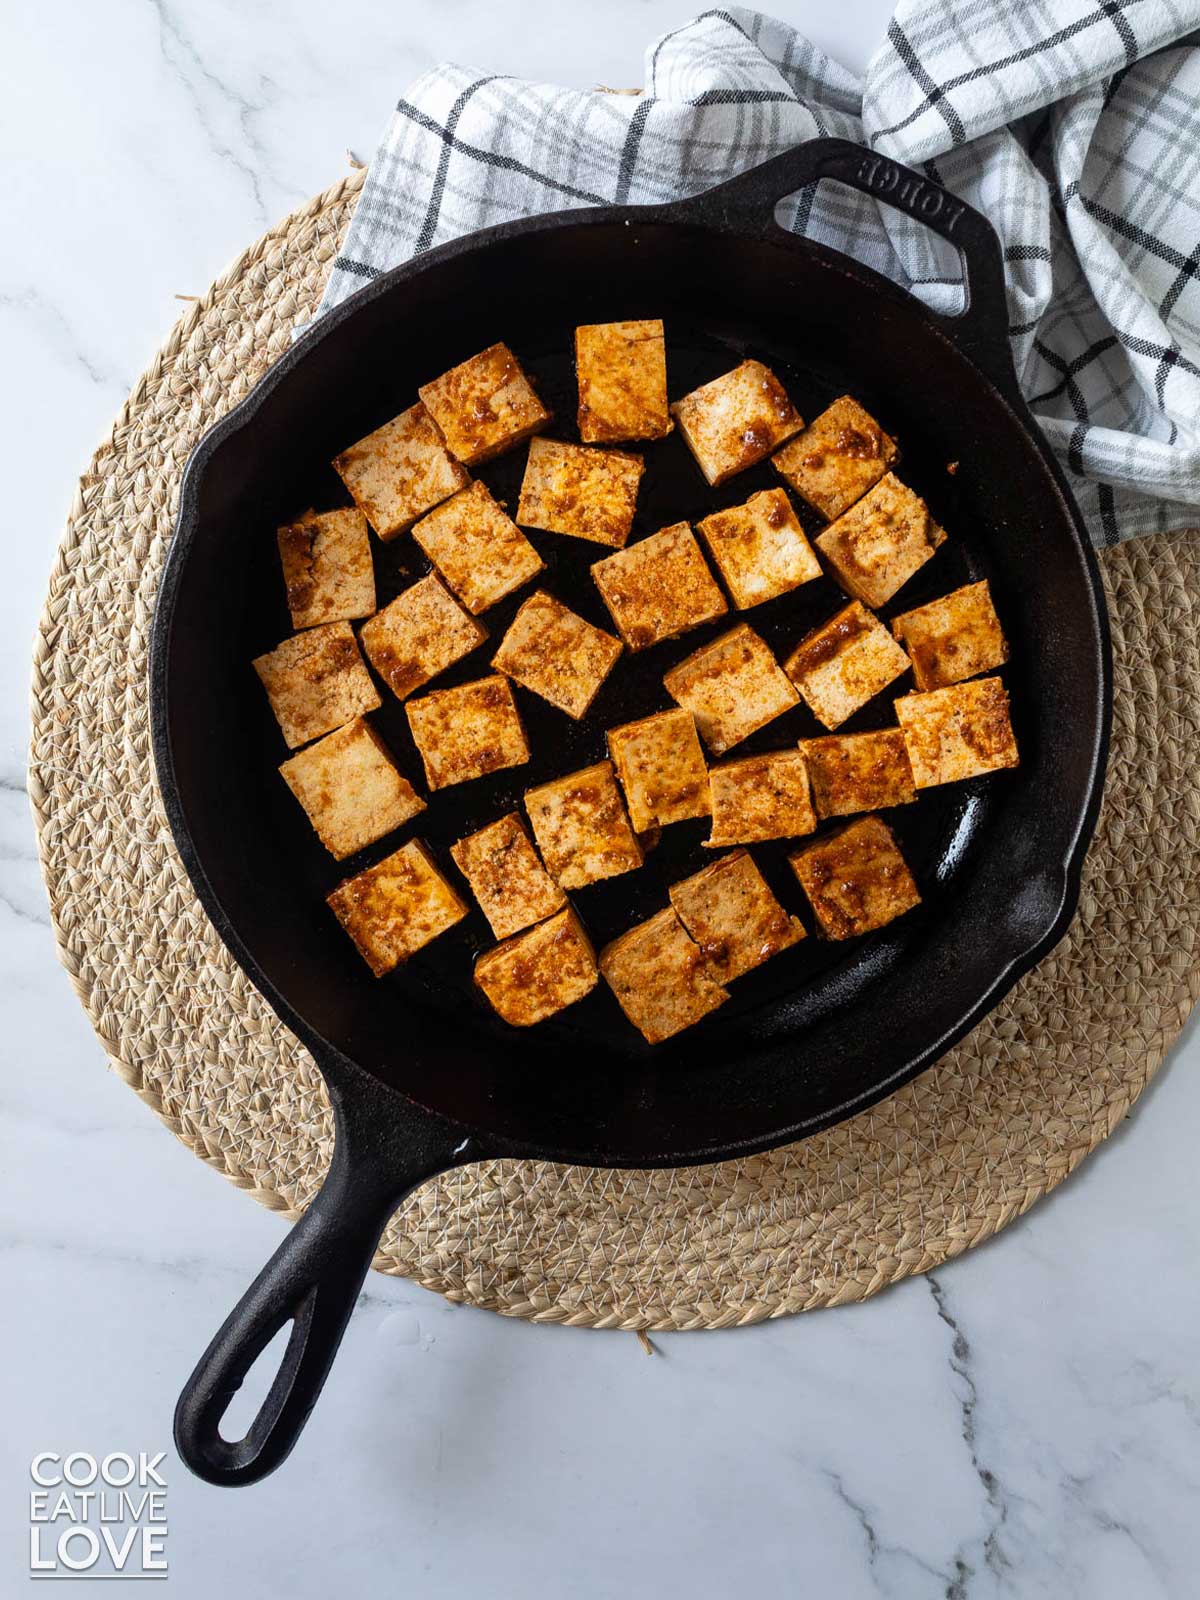 Marinated tofu placed in a cast iron skillet to cook.